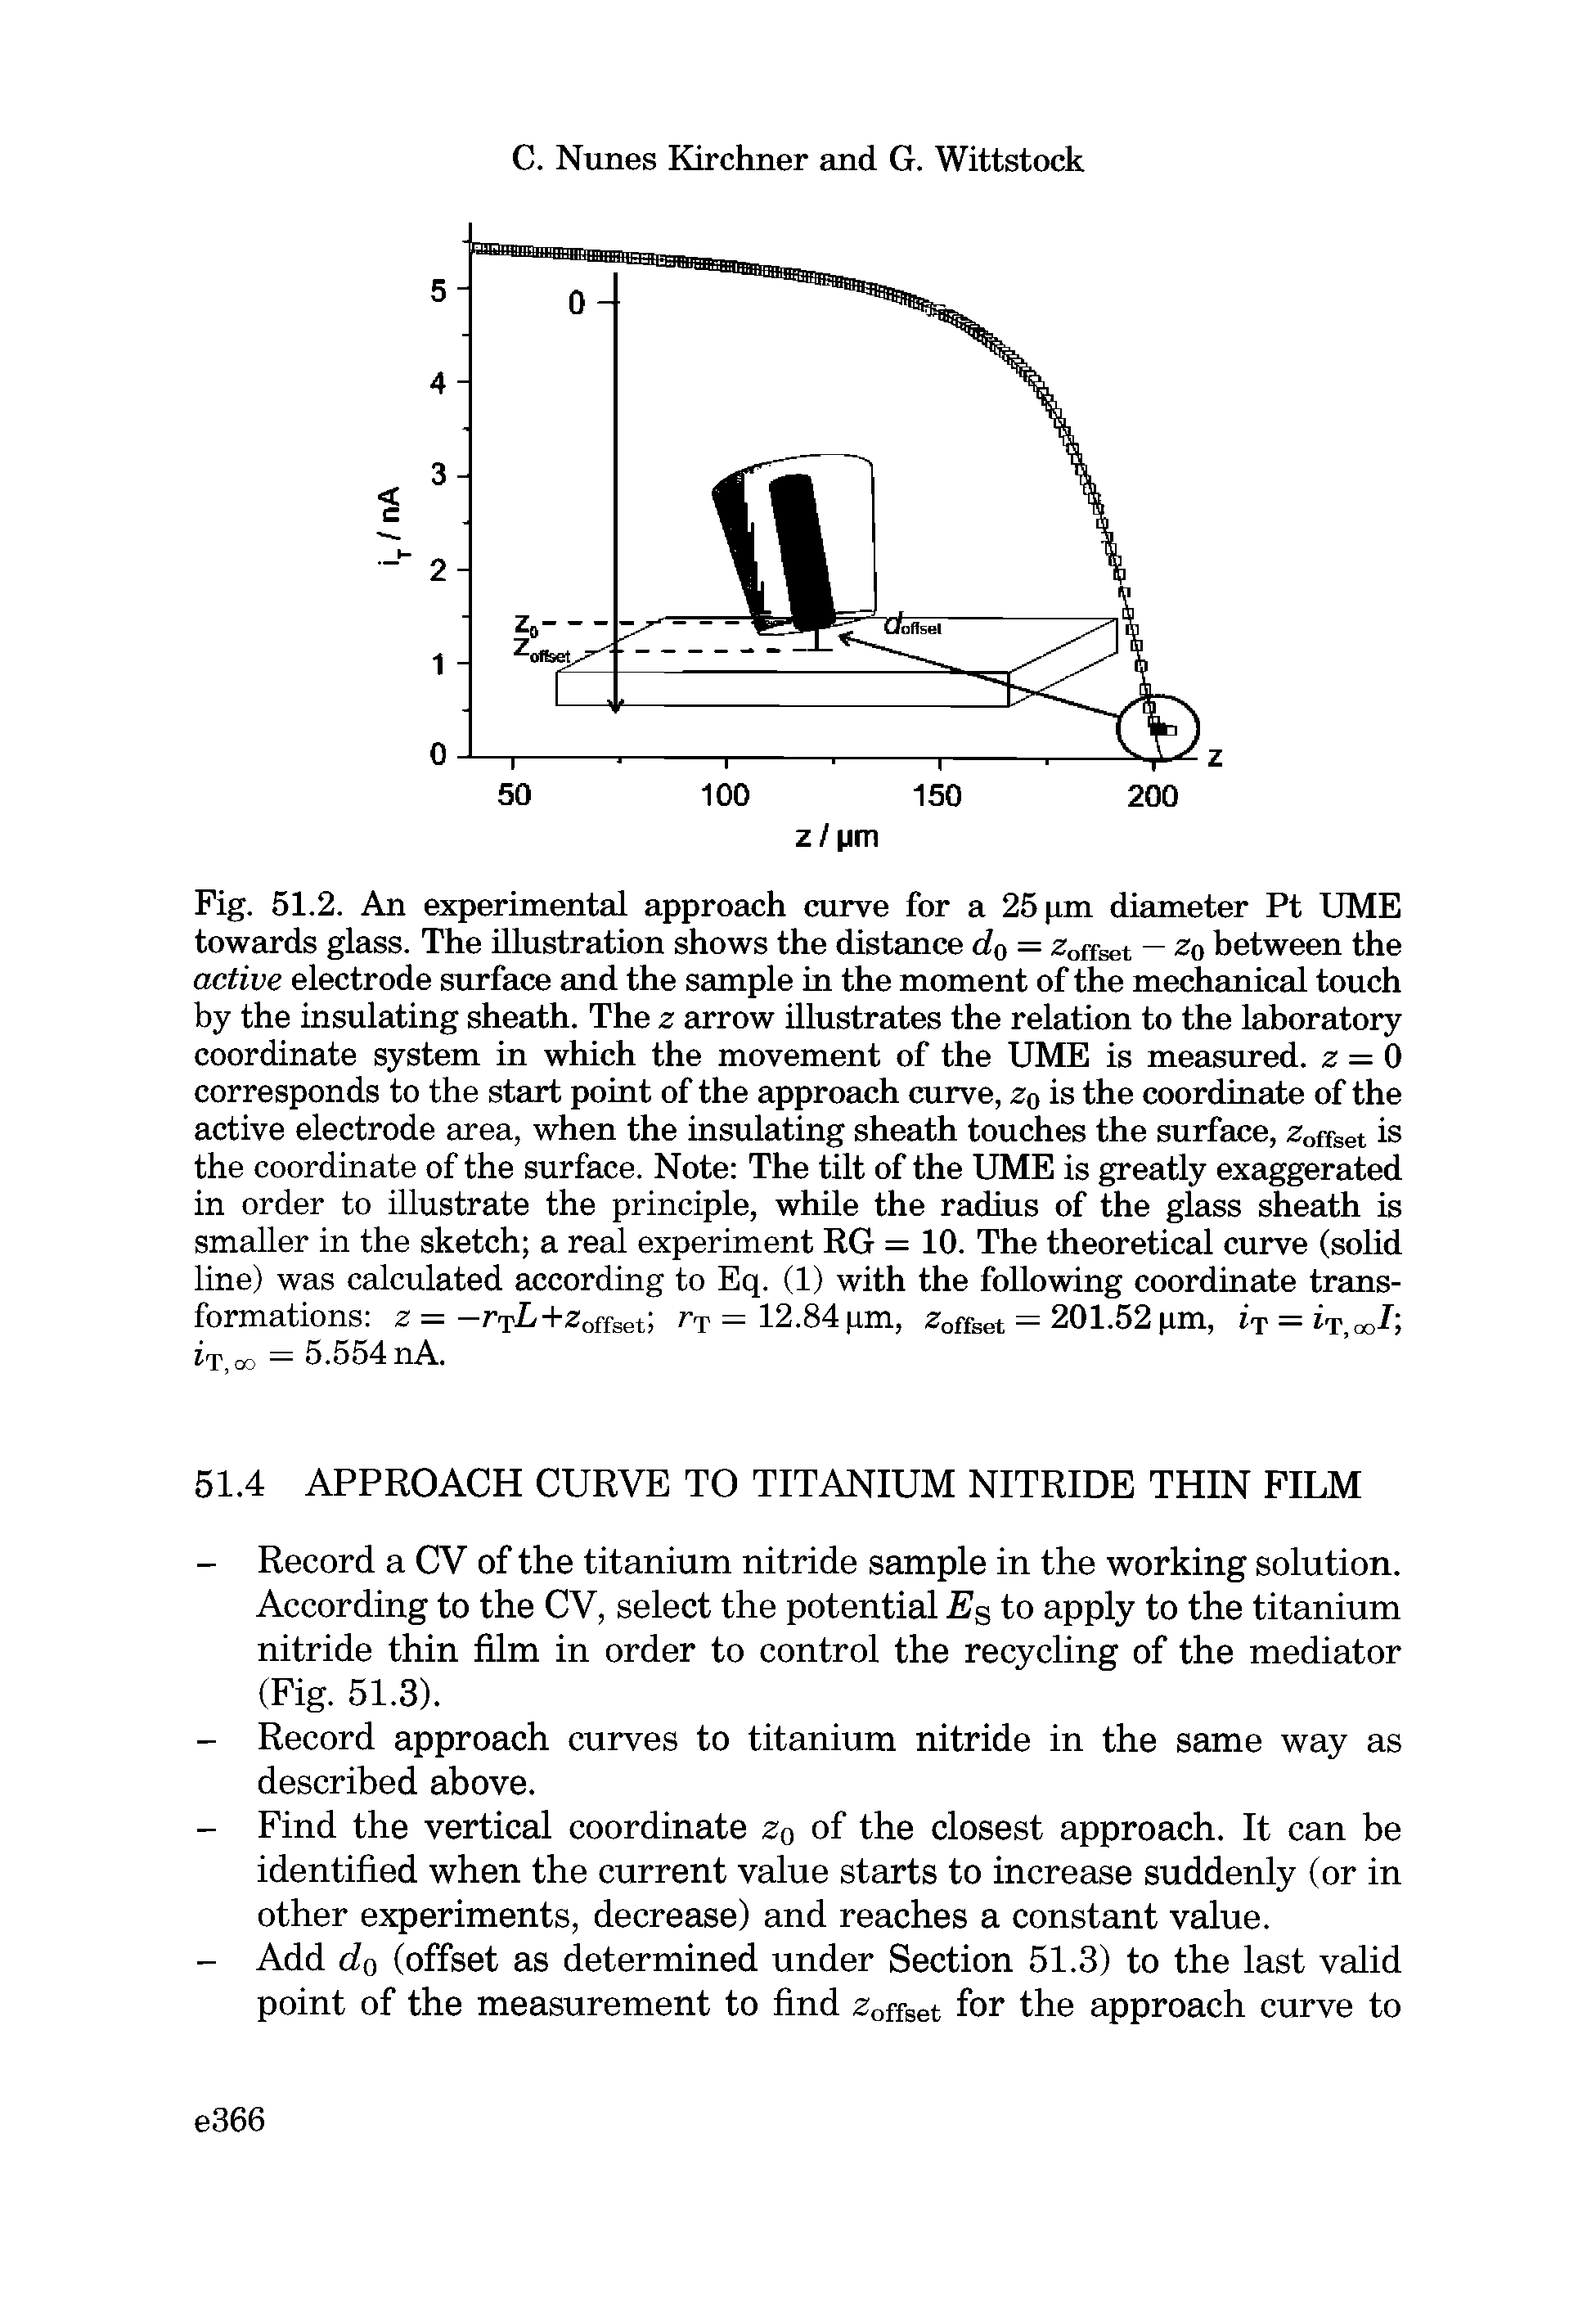 Fig. 51.2. An experimental approach curve for a 25 pm diameter Pt UME towards glass. The illustration shows the distance d0 — Offset — Zq between the active electrode surface and the sample in the moment of the mechanical touch by the insulating sheath. The z arrow illustrates the relation to the laboratory coordinate system in which the movement of the UME is measured, z — 0 corresponds to the start point of the approach curve, z0 is the coordinate of the active electrode area, when the insulating sheath touches the surface, zoffset is the coordinate of the surface. Note The tilt of the UME is greatly exaggerated in order to illustrate the principle, while the radius of the glass sheath is smaller in the sketch a real experiment RG = 10. The theoretical curve (solid line) was calculated according to Eq. (1) with the following coordinate transformations z = -rTL+z0ffset rT = 12.84 pm, zoffi5et = 201.52 pm, iT = iT>o0 = 5.554 nA.